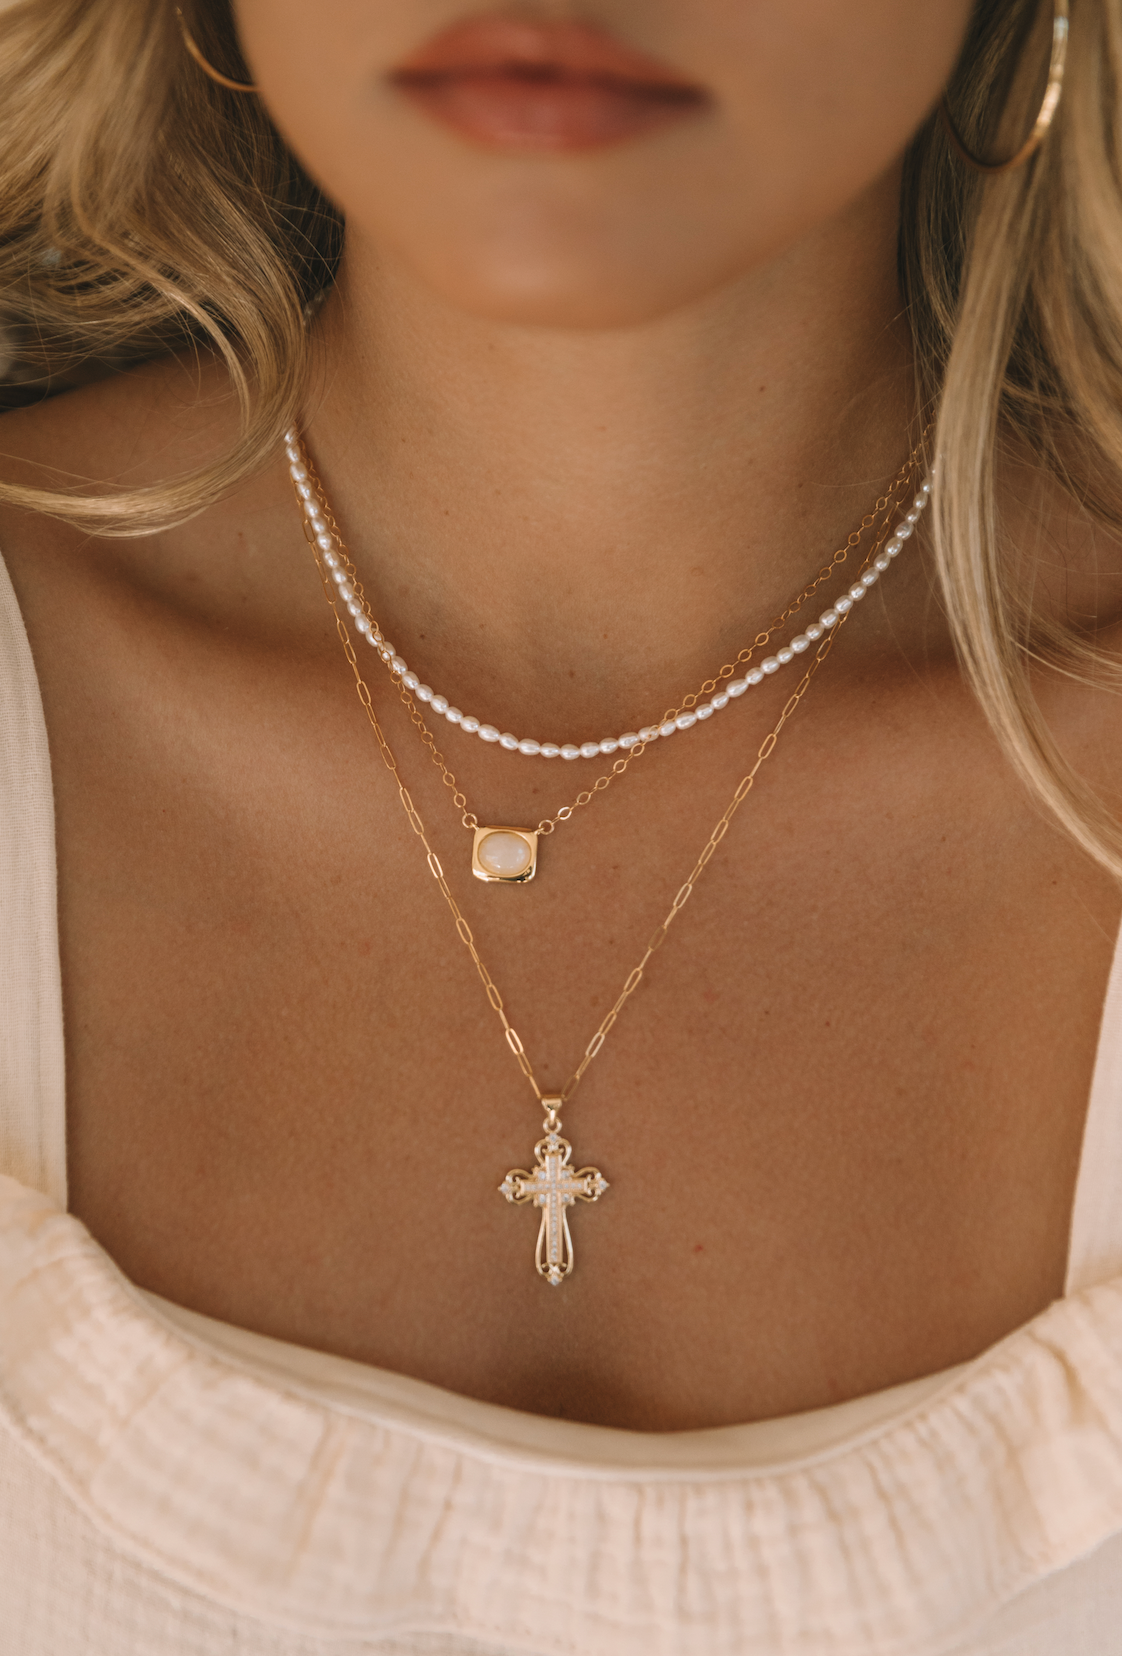 The Skeleton Cross Necklace